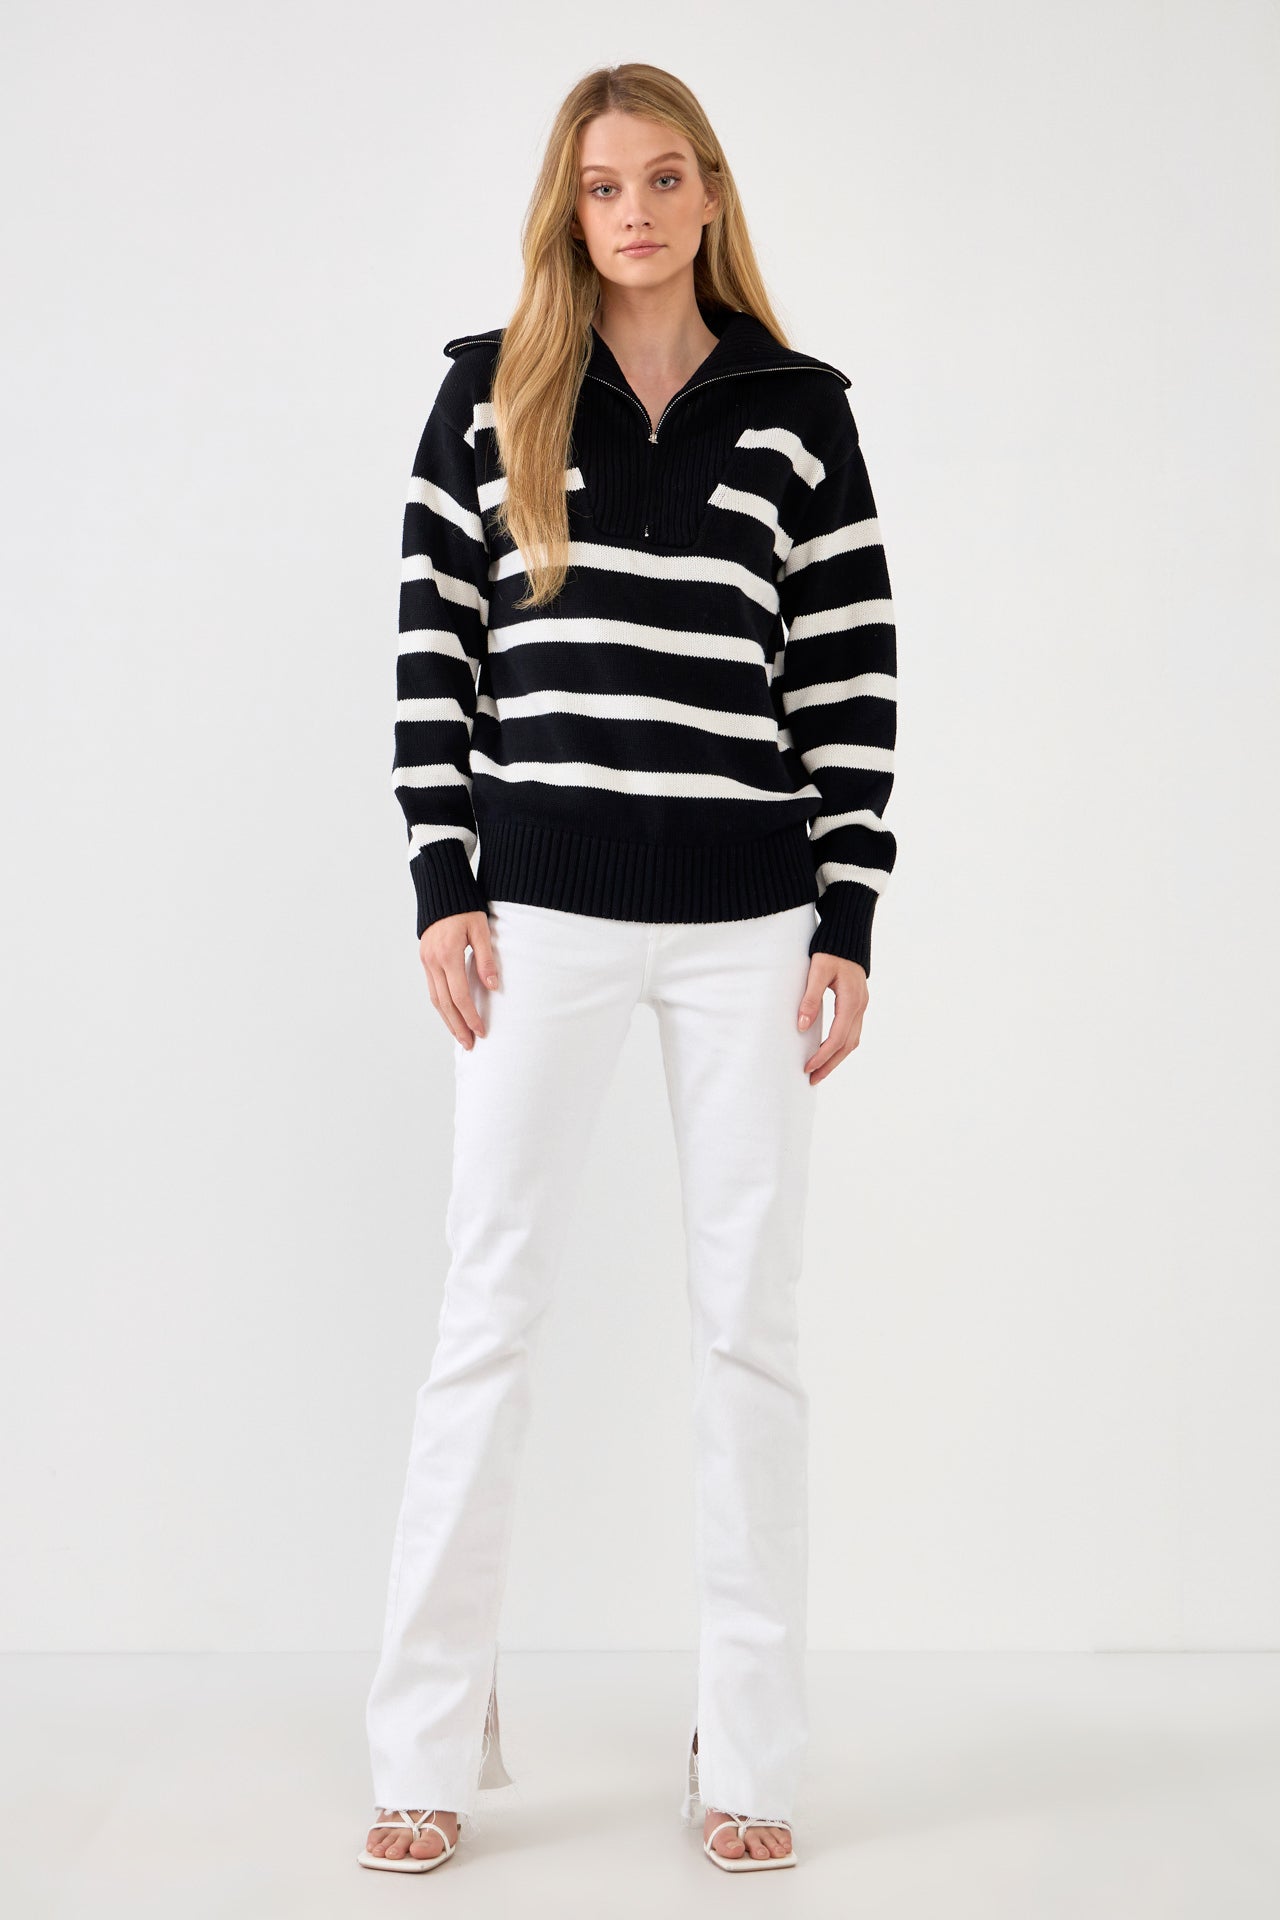 ENGLISH FACTORY-Striped Knit Zip Pullover-SWEATERS & KNITS available at Objectrare